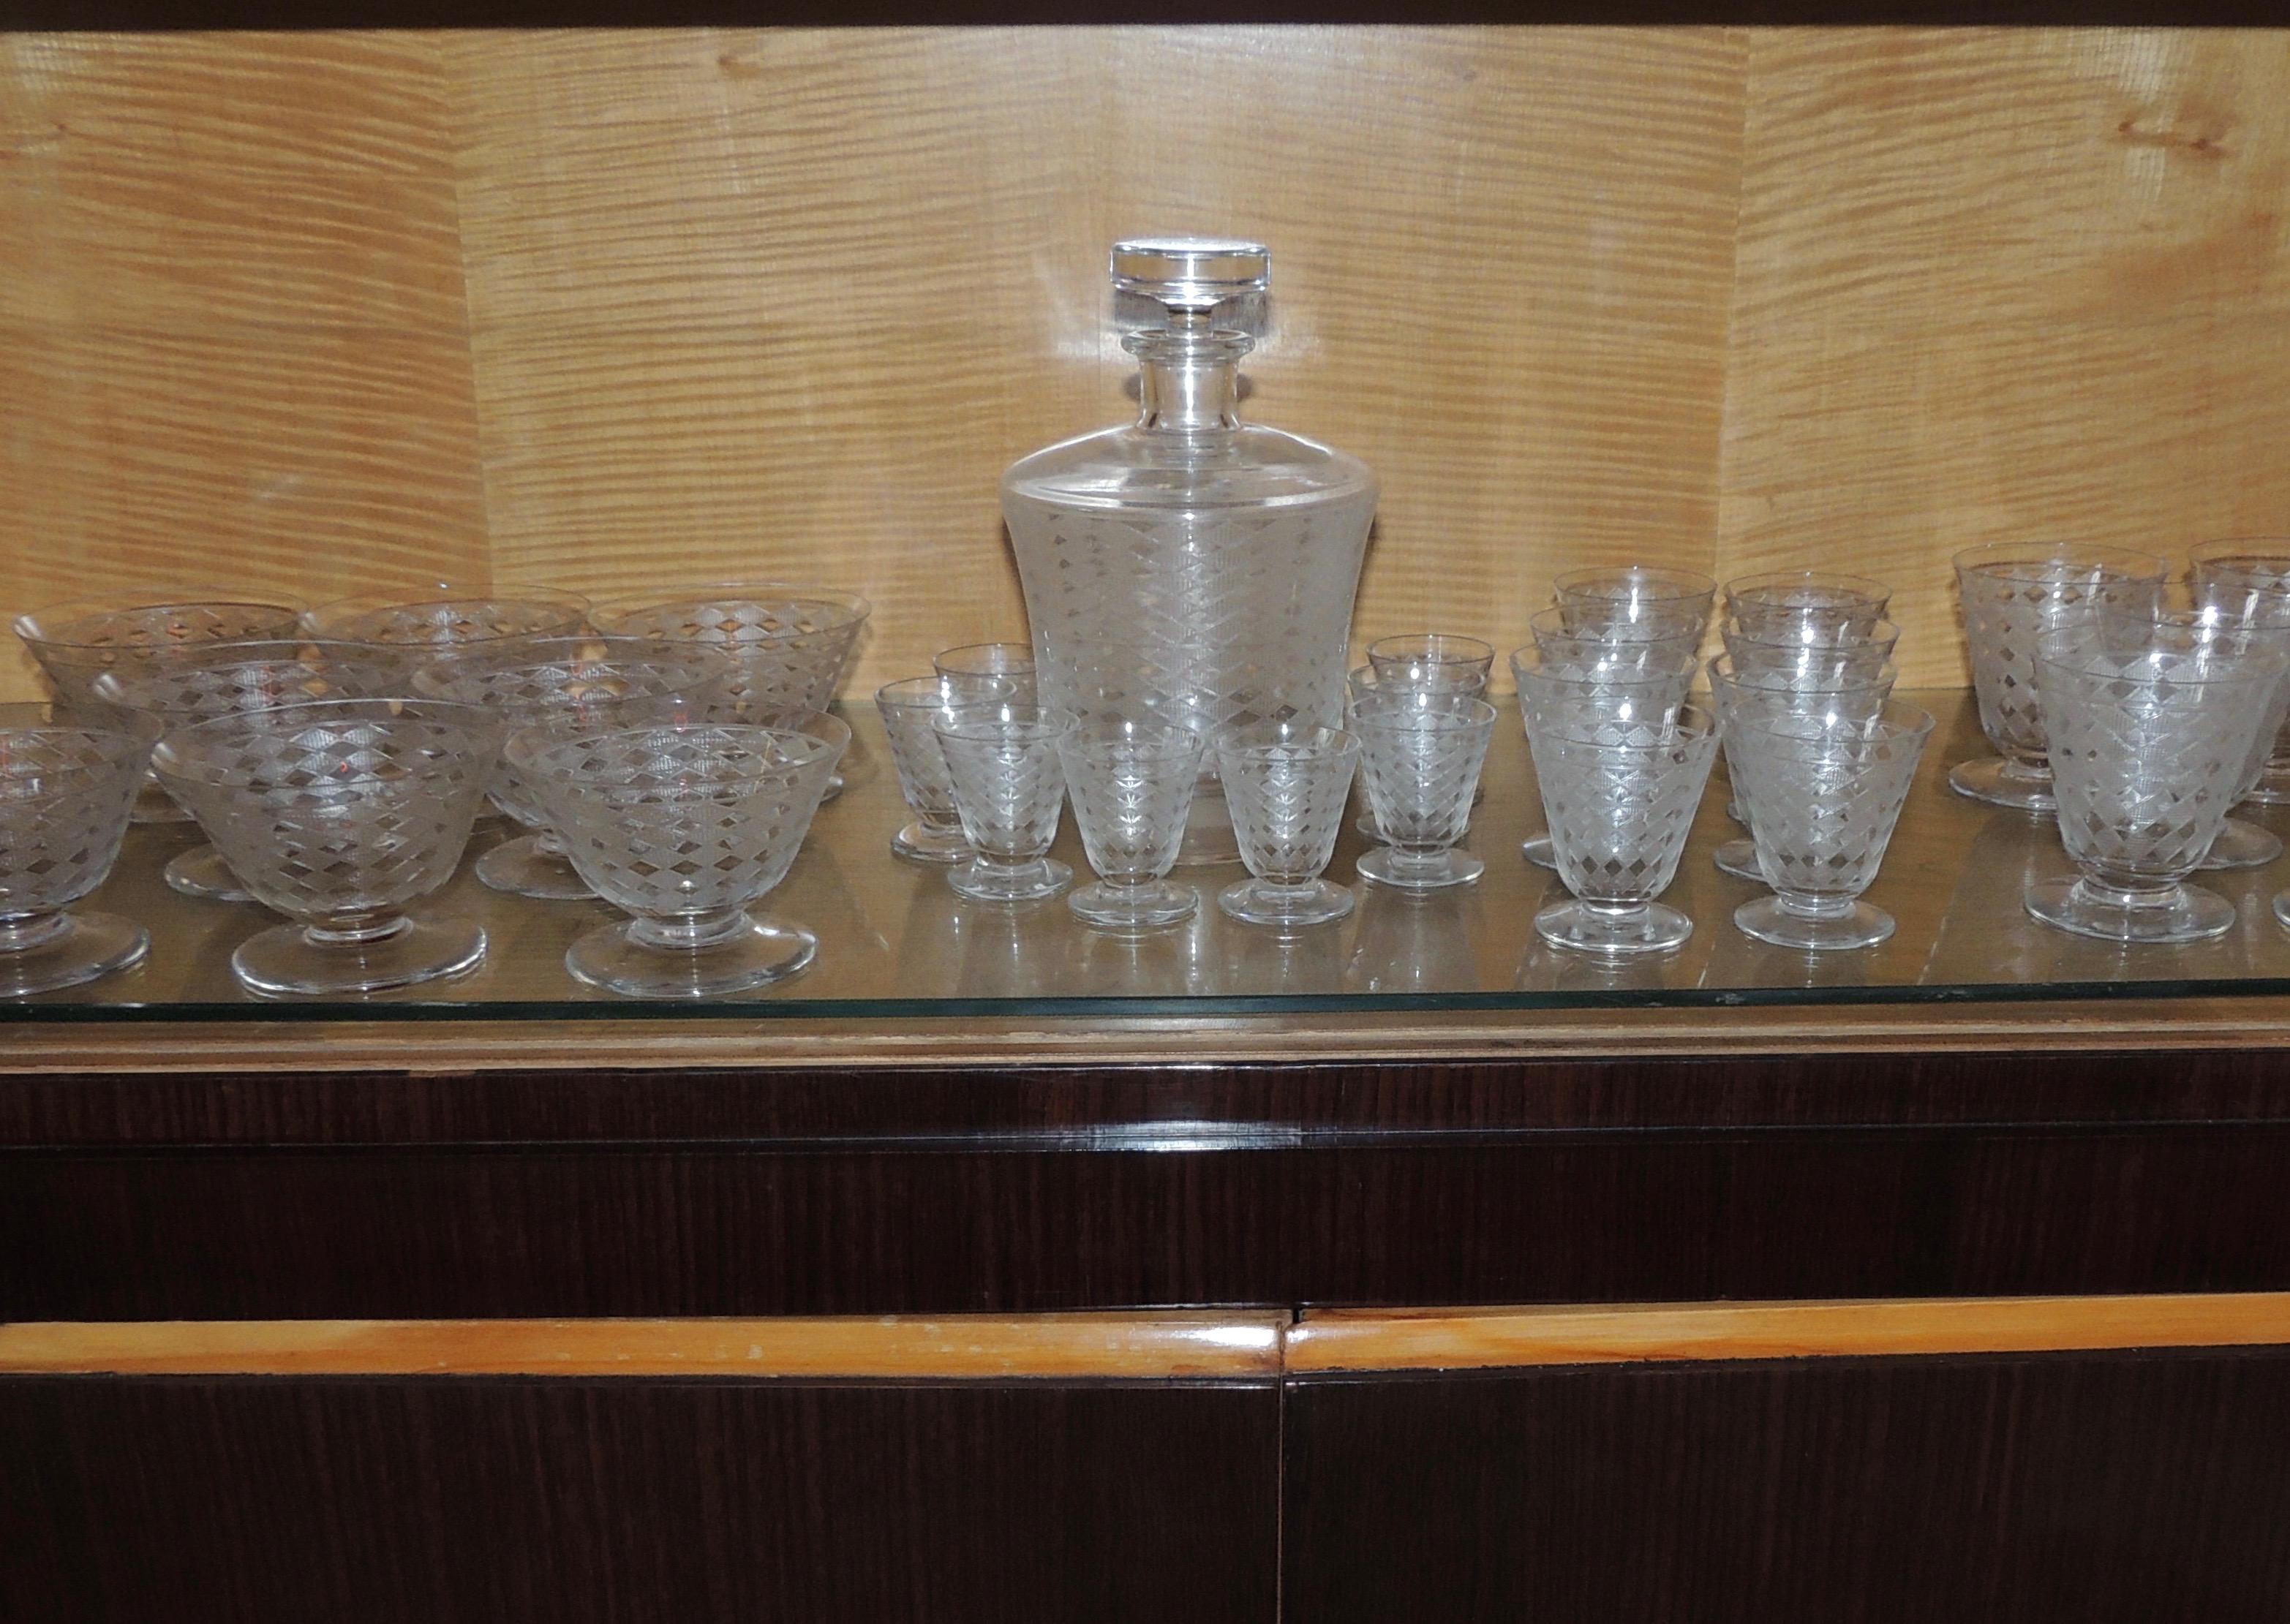 An Art Deco era set of Baccarat glassware with a decanter and 32 glasses in four sizes for your drinking pleasure! This unusual set in an alternating smooth and textured argyle pattern is in beautiful condition and ready to use for a variety of